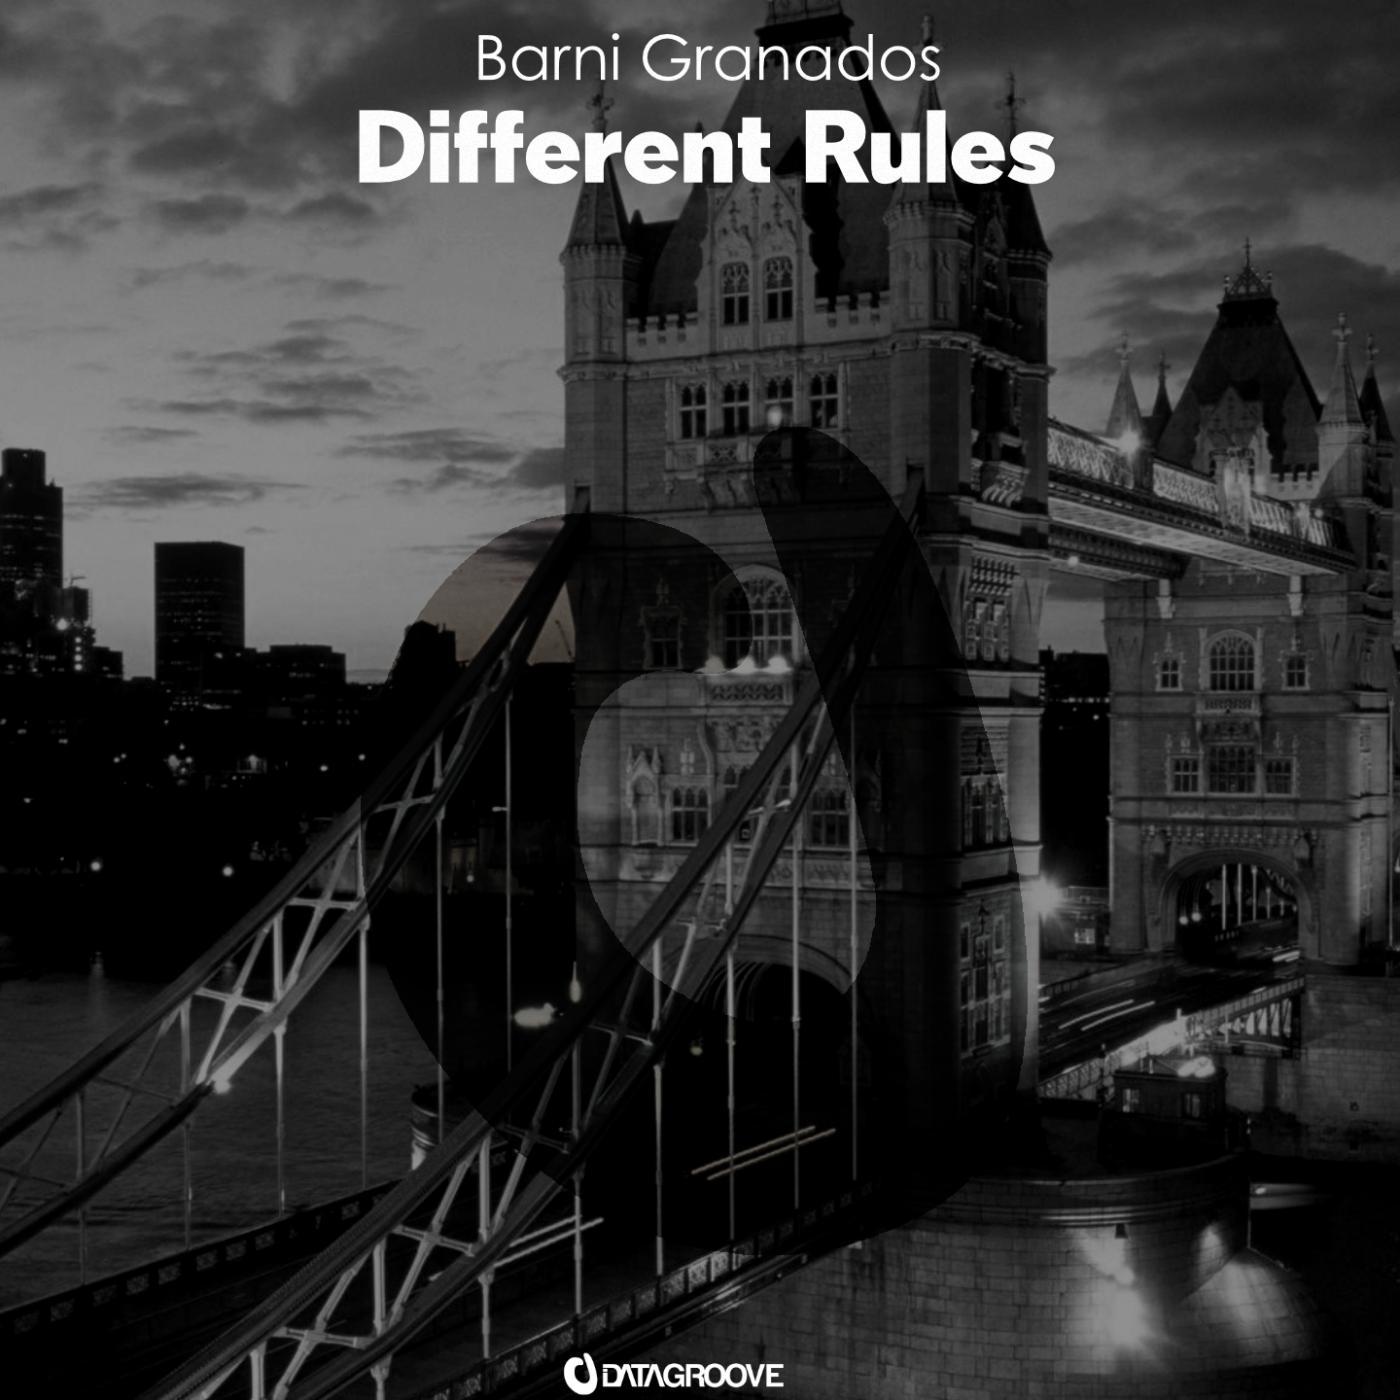 Different Rules